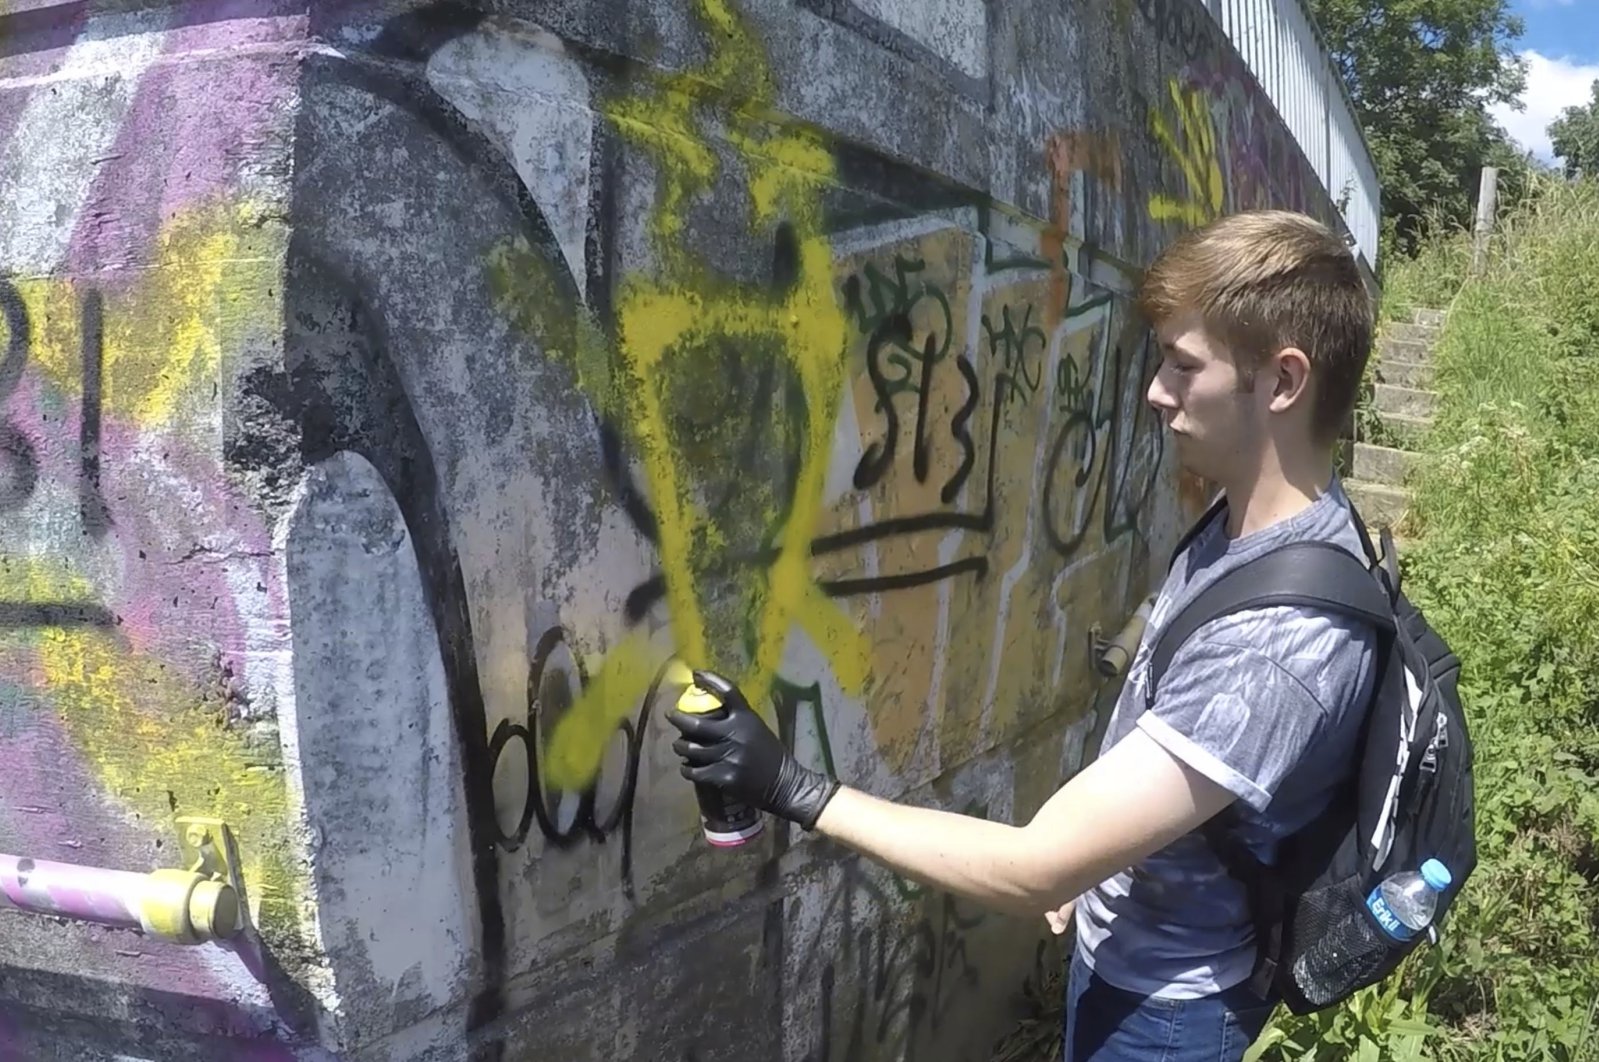 This grab taken from a video provided by the Metropolitan Police shows Benjamin Hannam spray painting graffiti which was shown to the jury during his trial at the Old Bailey in London, the U.K., Thursday, April 1, 2021. (Metropolitan Police via AP)